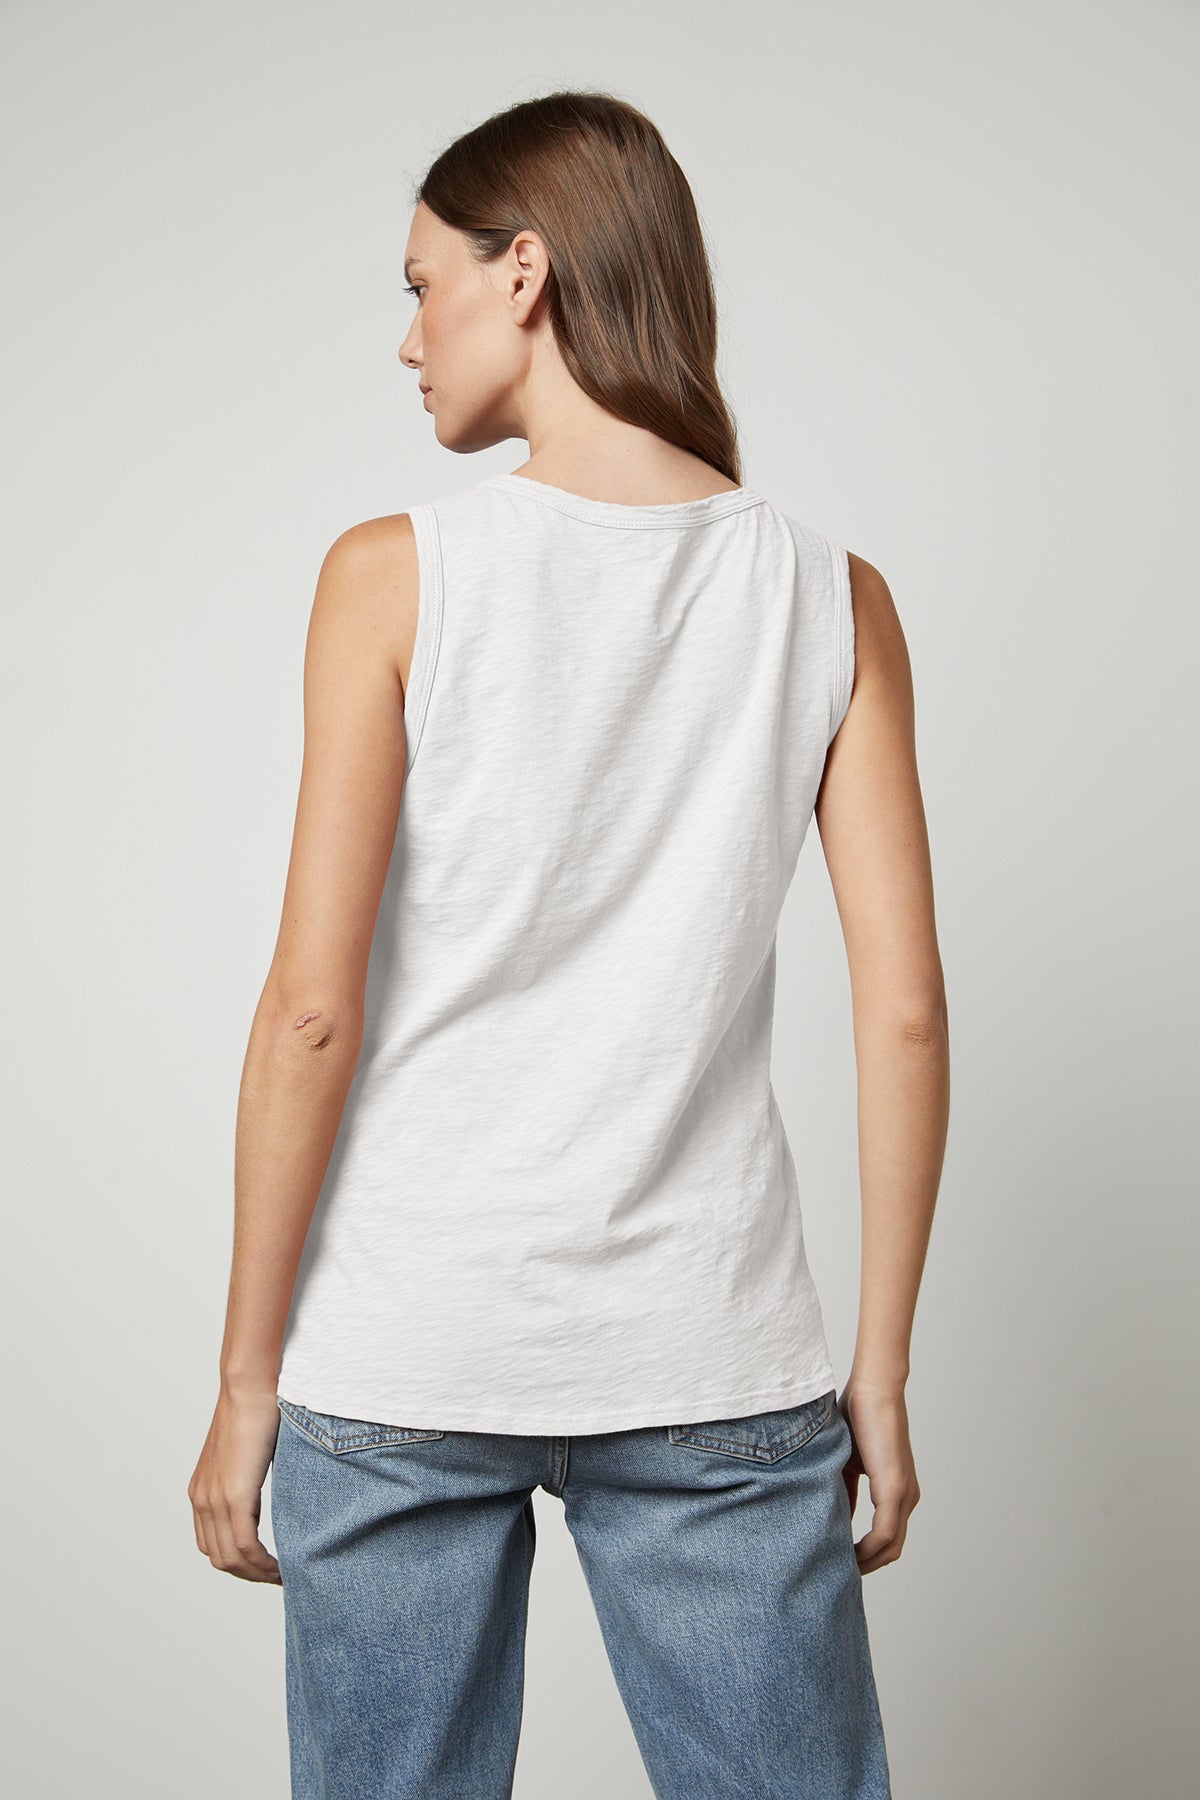 The back view of a woman wearing a Velvet by Graham & Spencer TAURUS COTTON SLUB TANK and jeans.-26632370651329